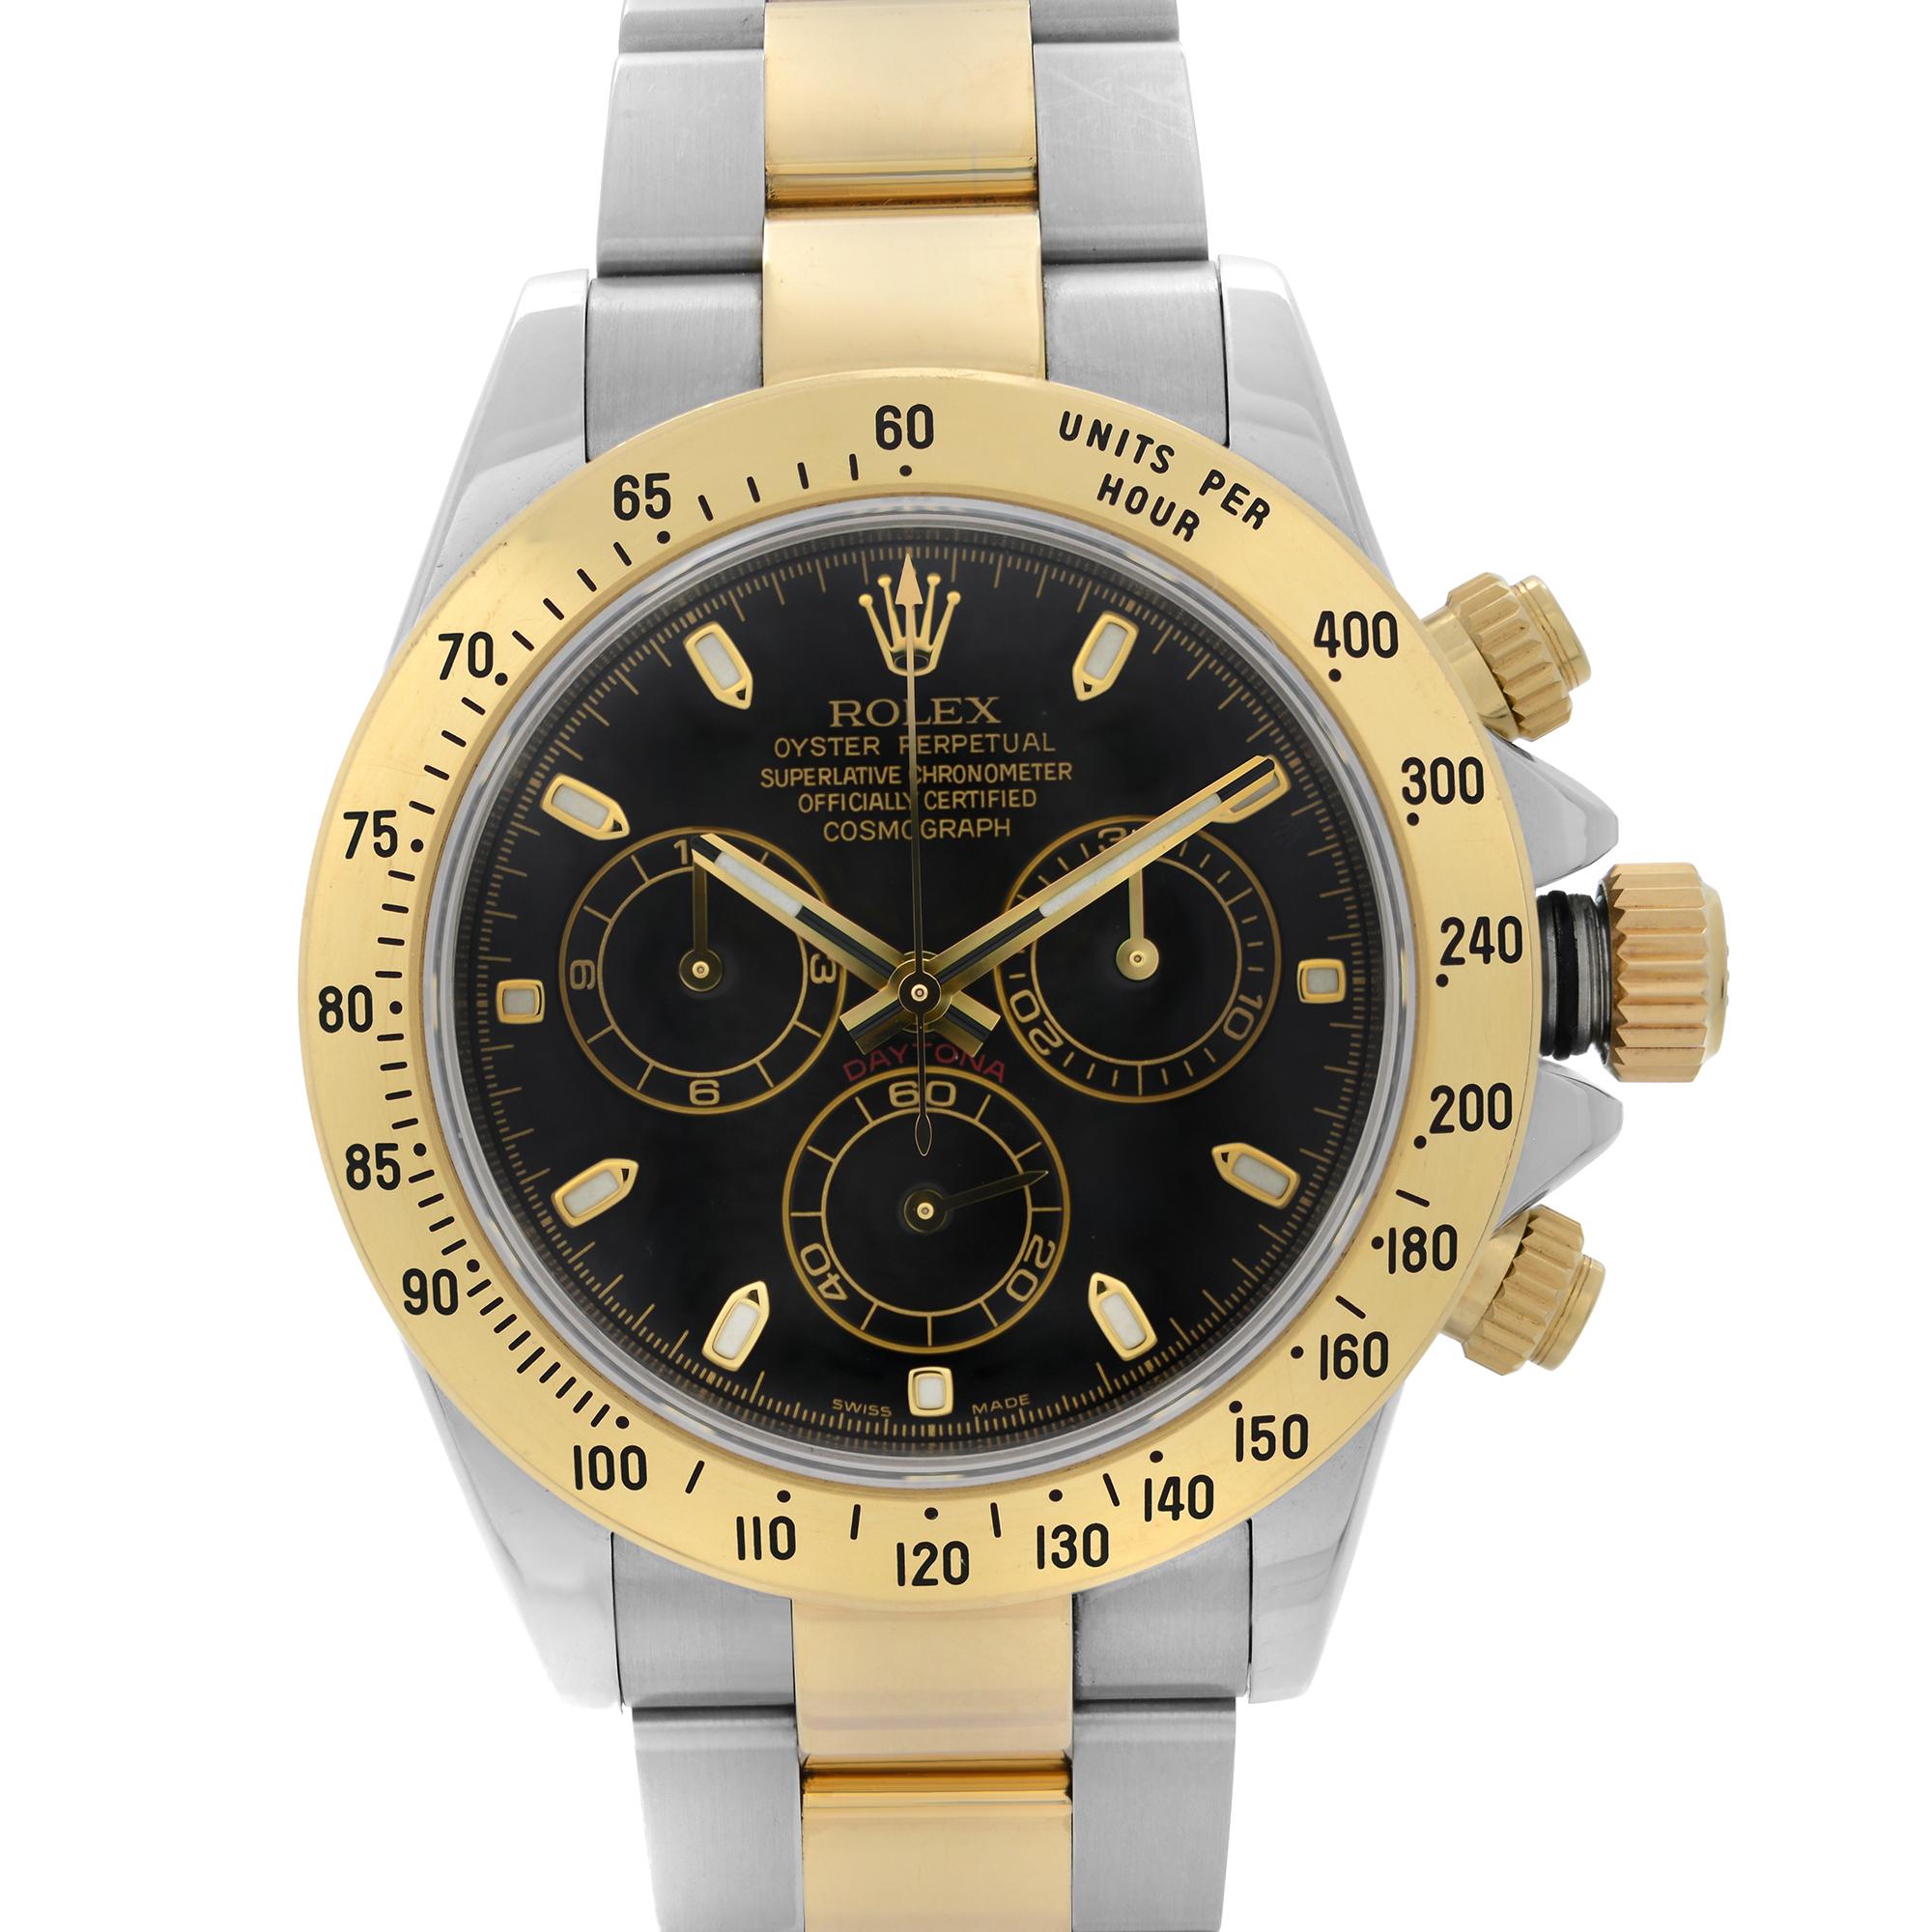 Pre-owned. No Original Box and Papers are Included. Comes with a Chronostore Presentation Box and Chronostore Authenticity Card. Covered by 3-year Chronostore Warranty.


Details:
Brand Rolex
Department Men
Model Number 116523
Country/Region of